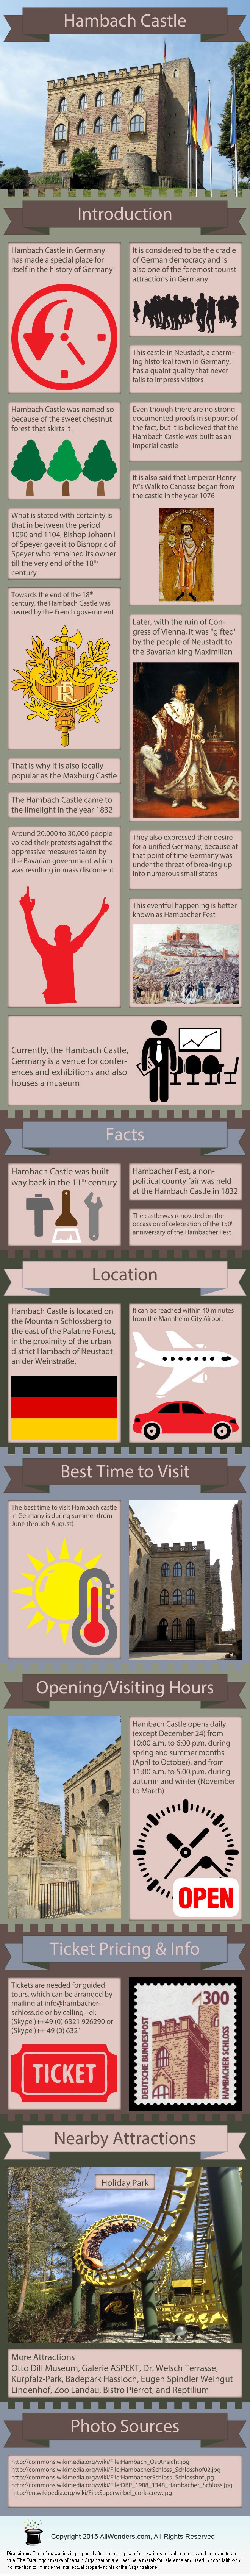 Hambach Castle Infographic